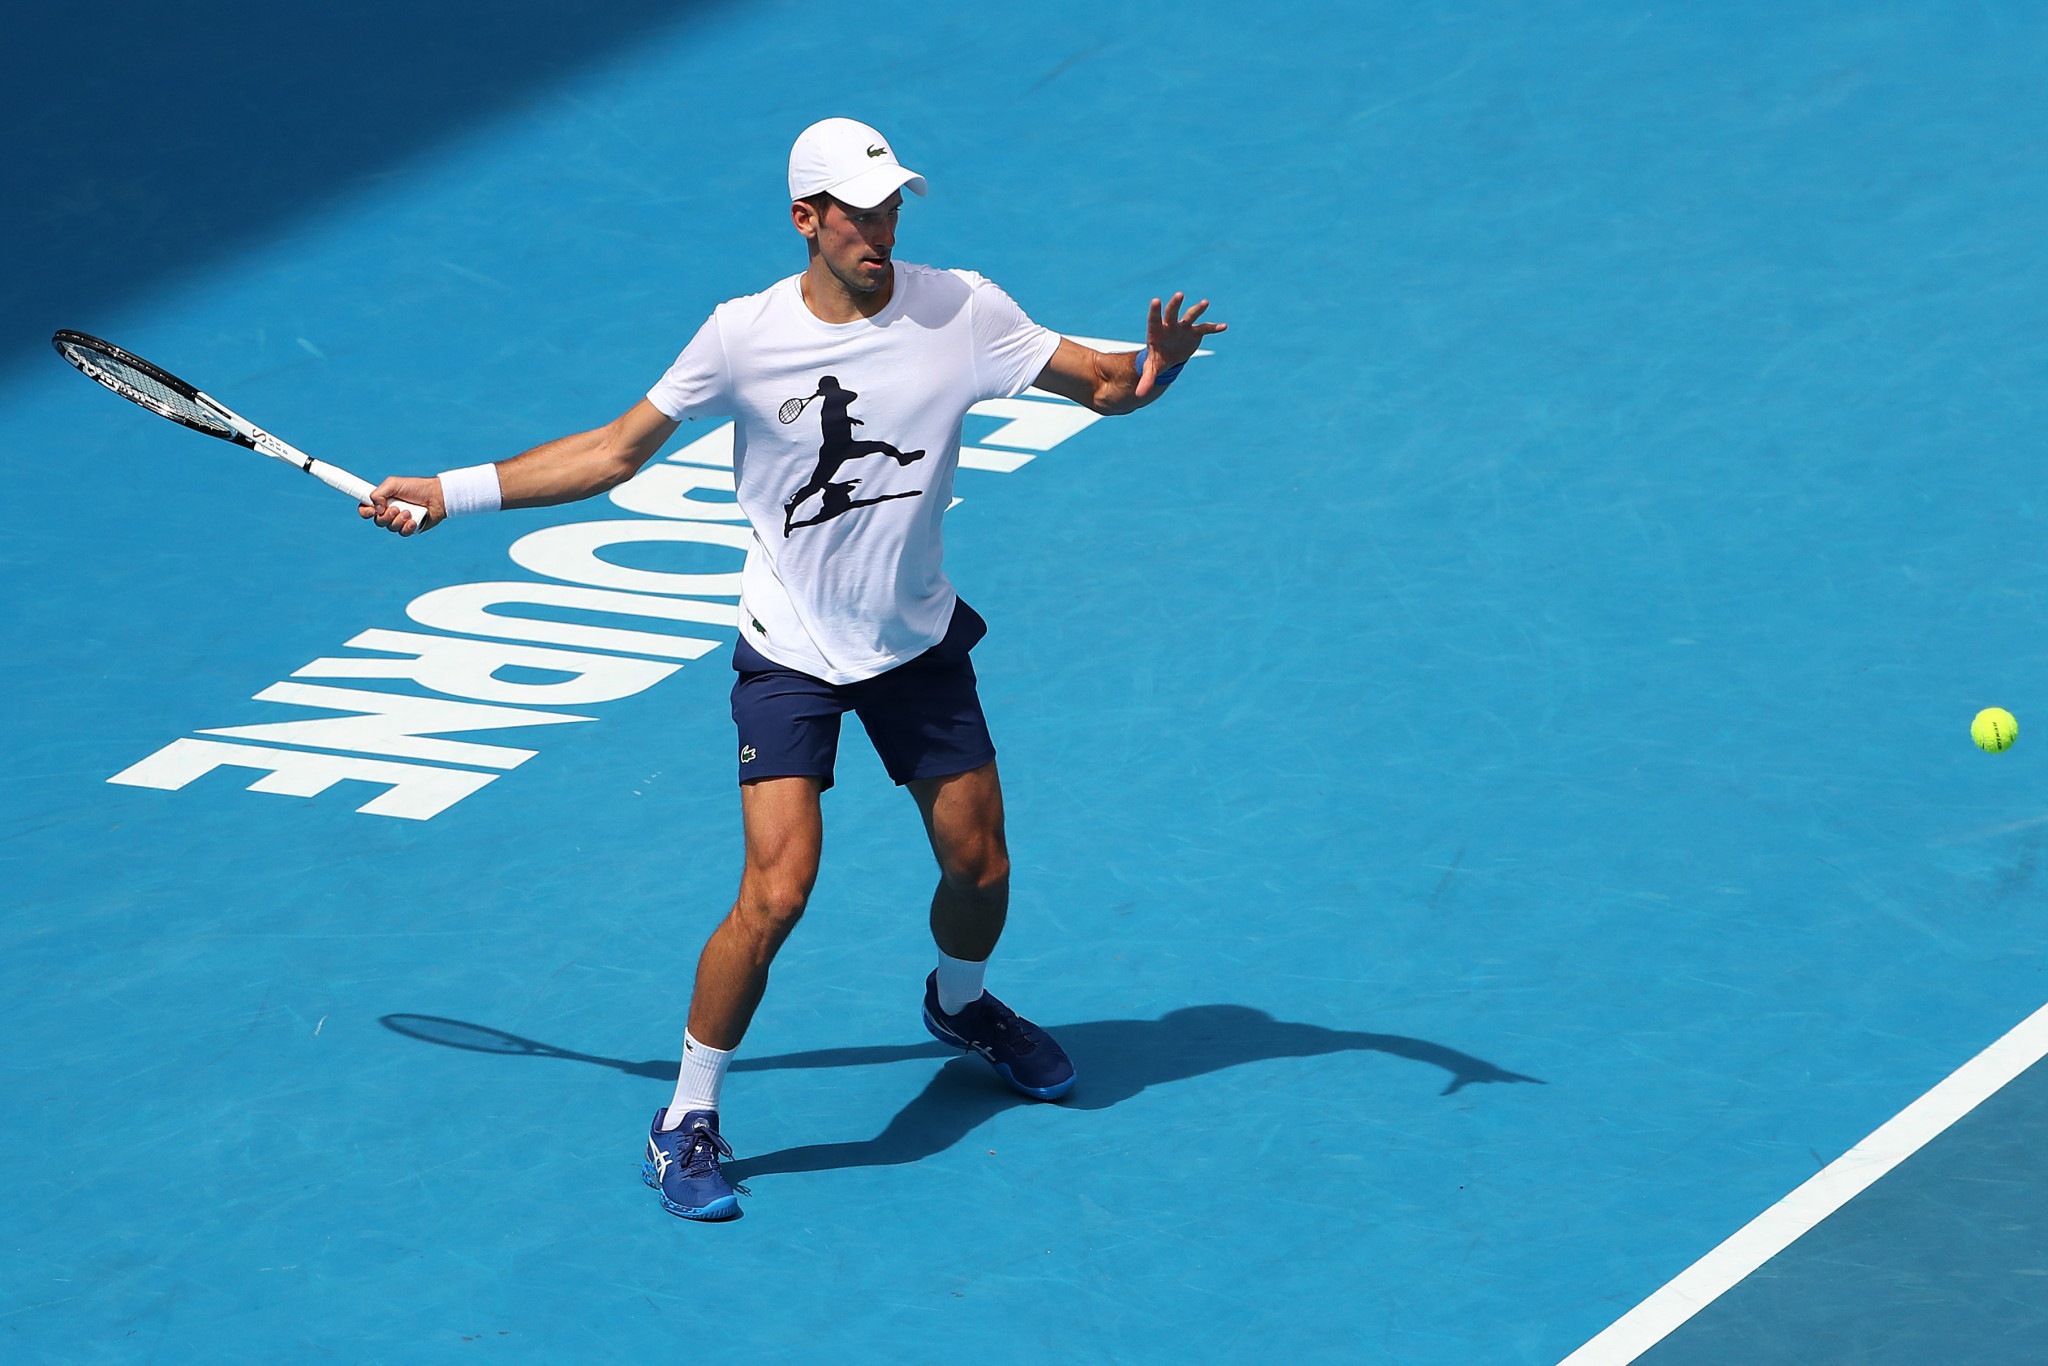 Djokovic included in Australian Open draw as crowd capacity halved over COVID-19 surge